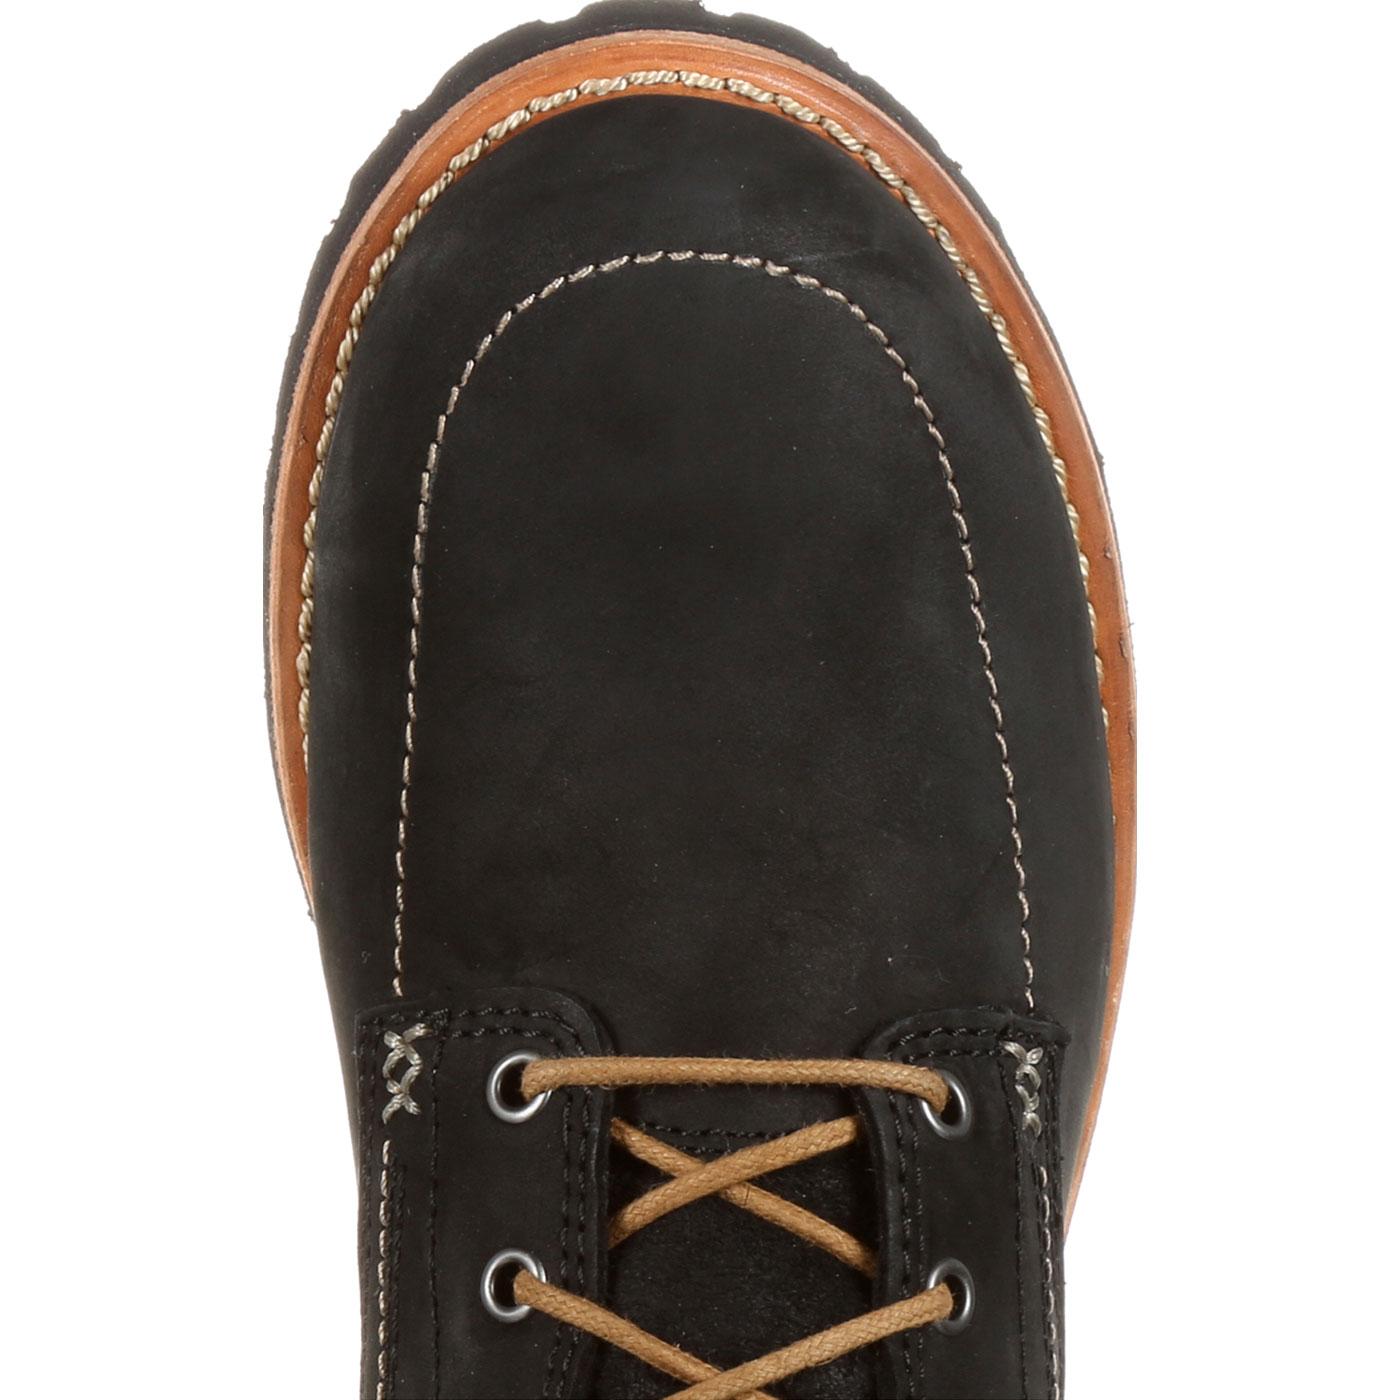 Georgia Boot - Small Batch Boot comfortable, stylish, casual men's boot.